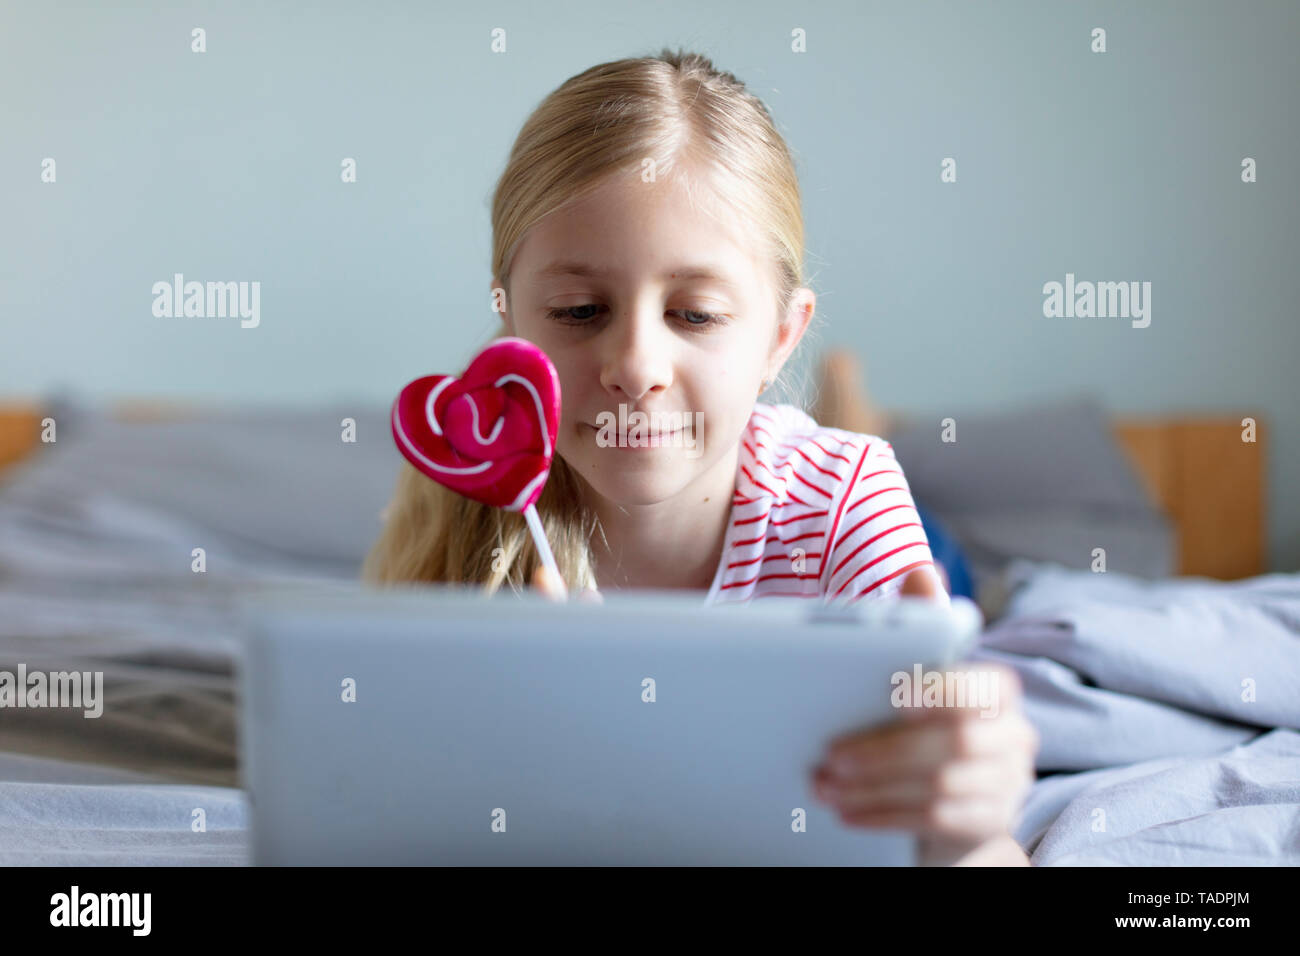 Portrait of blond girl lying on bed with lollipop using digital tablet Stock Photo